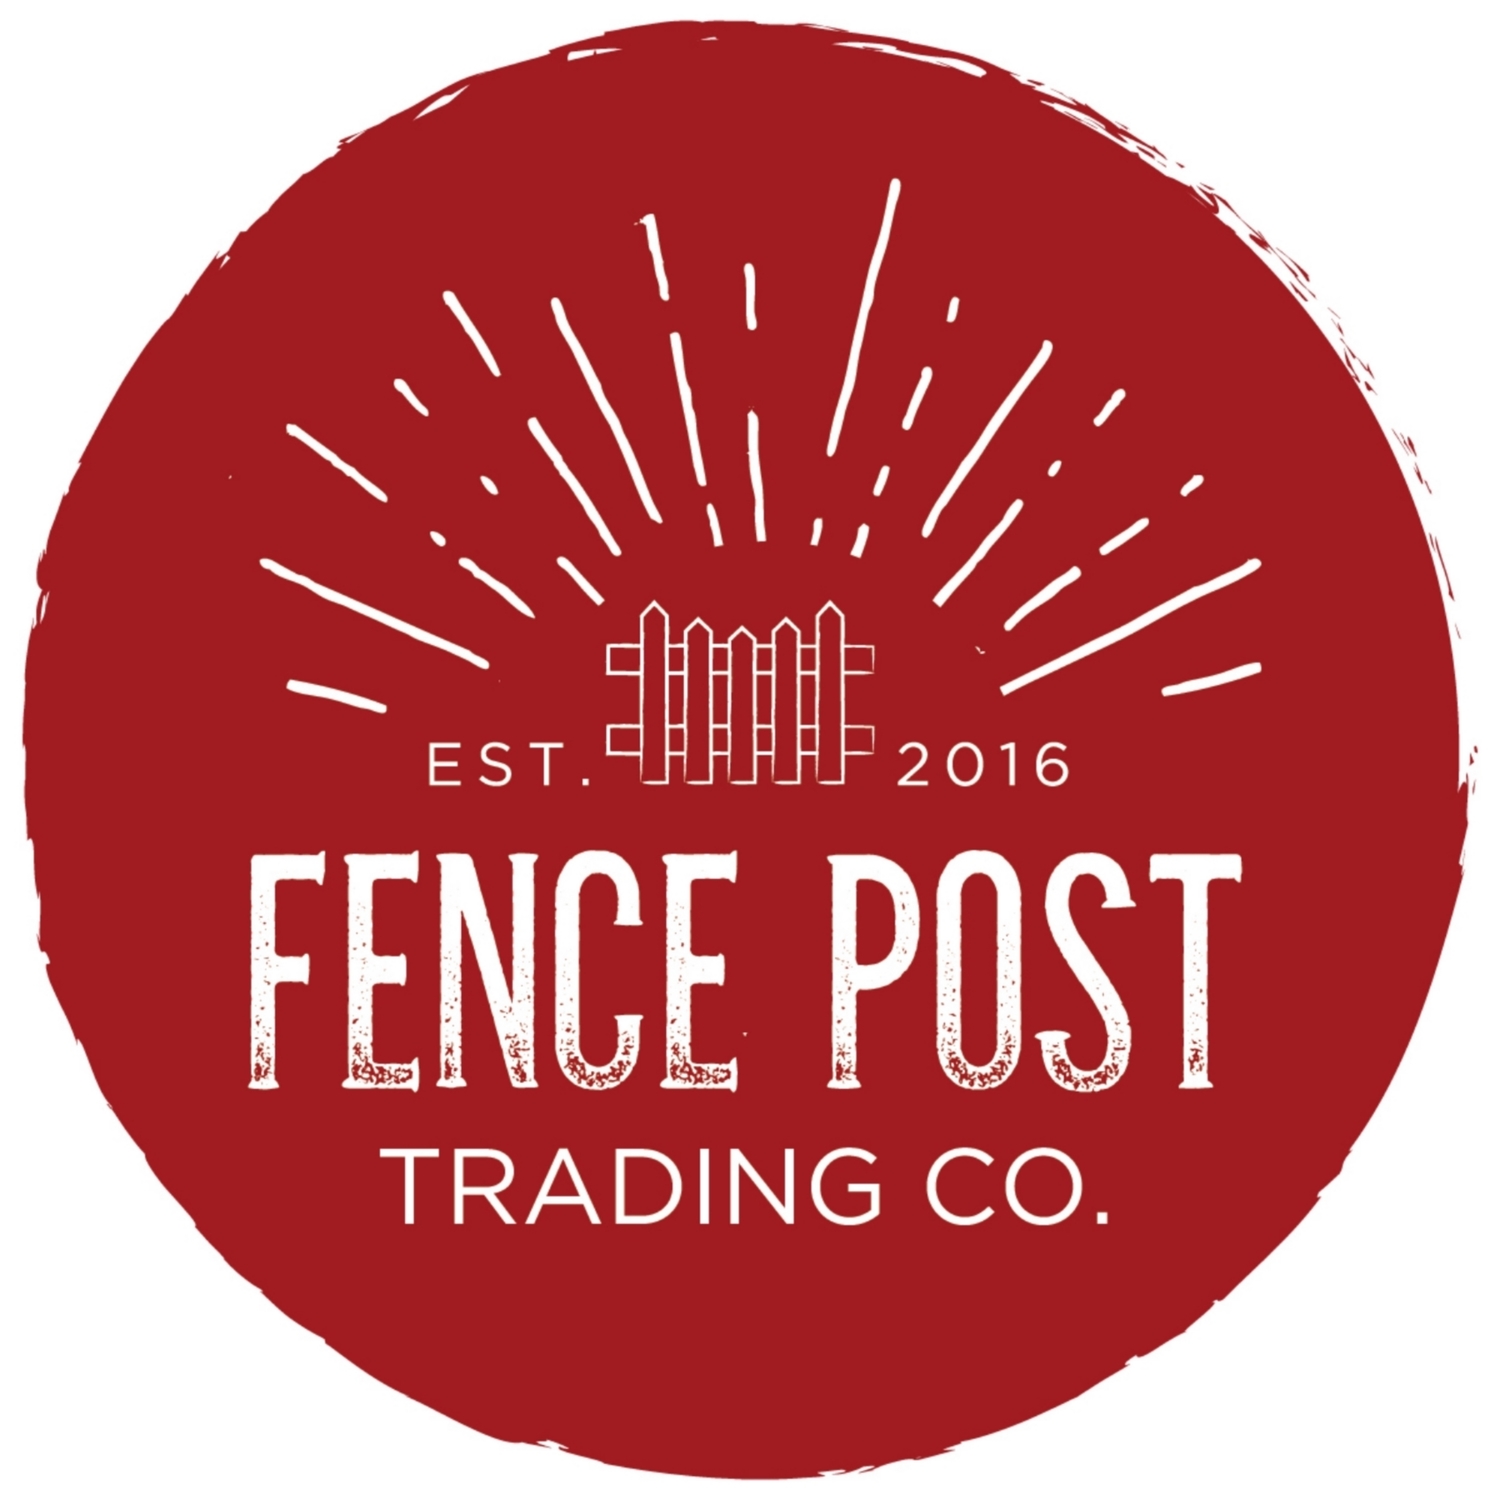 Fence Post Trading Co.